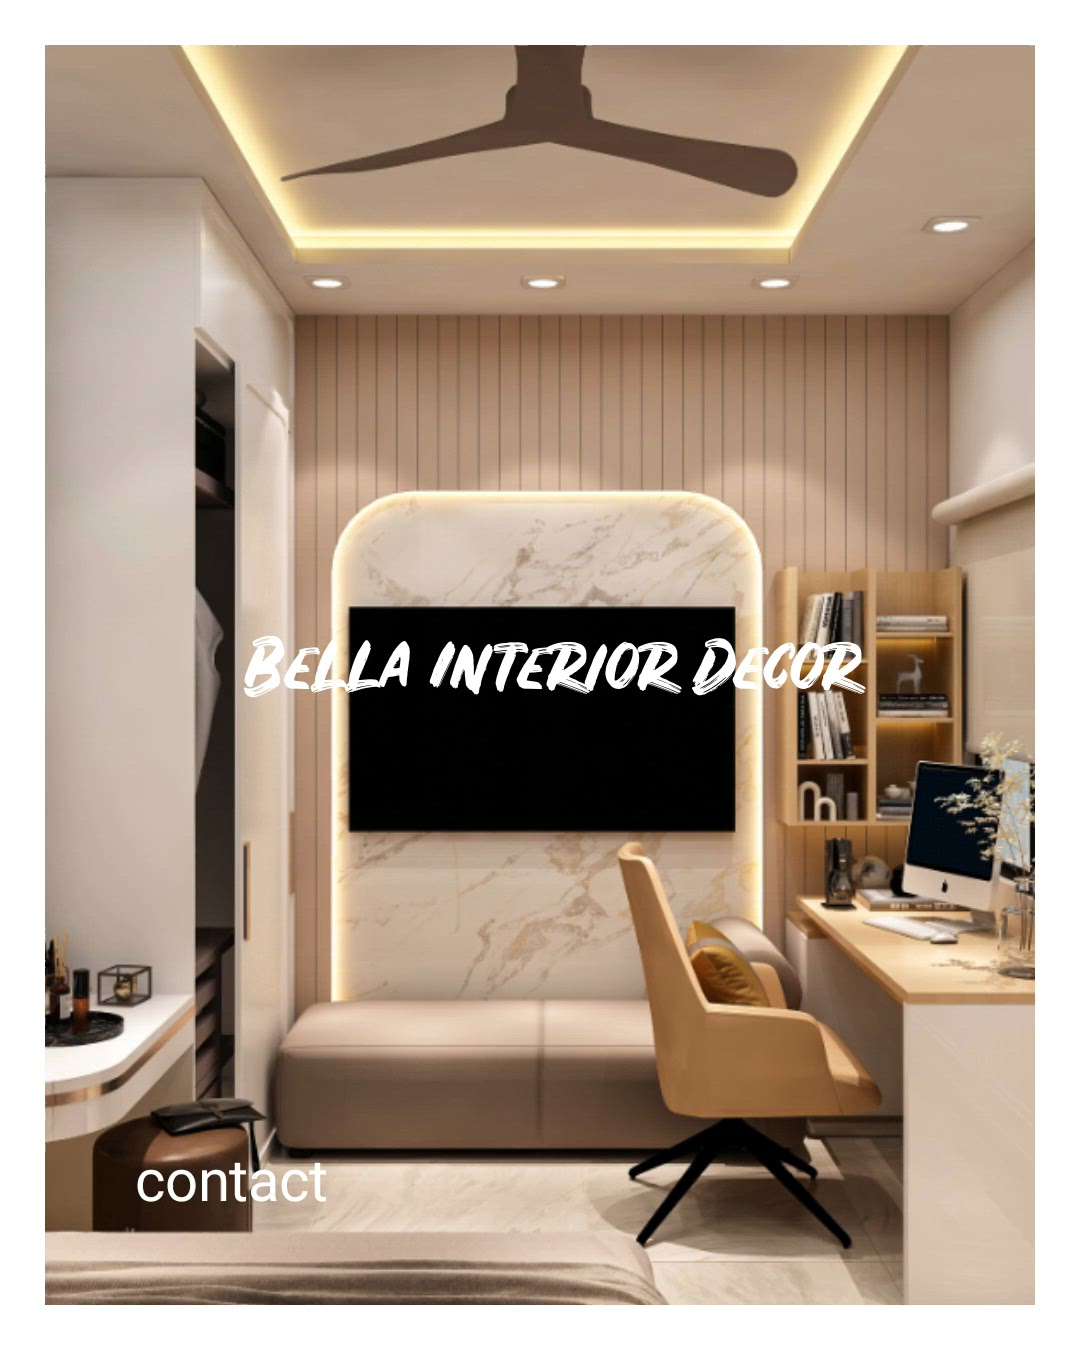 For house interiors contact

BELLA INTERIOR DECOR 
.
.
Make Your Dream House Come True With @bella_interiordecor 
.
.
• Your Budget ~ Their Brain 
• Themed Based Work
• BedRooms, Living Rooms, Study, Kitchen, Offices, Showrooms & More! 
.
.

.
Address :- jangirwala square Indore m.p. 

Credits: bella_interiordecor 

#interiordesign #design #interior #homedecor
#architecture #home #decor #interiors
#homedesign #interiordesigner #furniture
 #designer #interiorstyling
#interiordecor #homesweethome 
#furnituredesign #livingroom #interiordecorating  #instagood #instagram
#kitchendesign #foryou #photographylover #explorepage✨ #explorepage #viralpost #trending #trends #reelsinstagram #exploremore   #kolopost   #koloapp  #koloviral  #koloindore  #InteriorDesigner  #indorehouse   #LUXURY_INTERIOR   #luxurysofa   #luxurylivingroom  #koloapppurchase